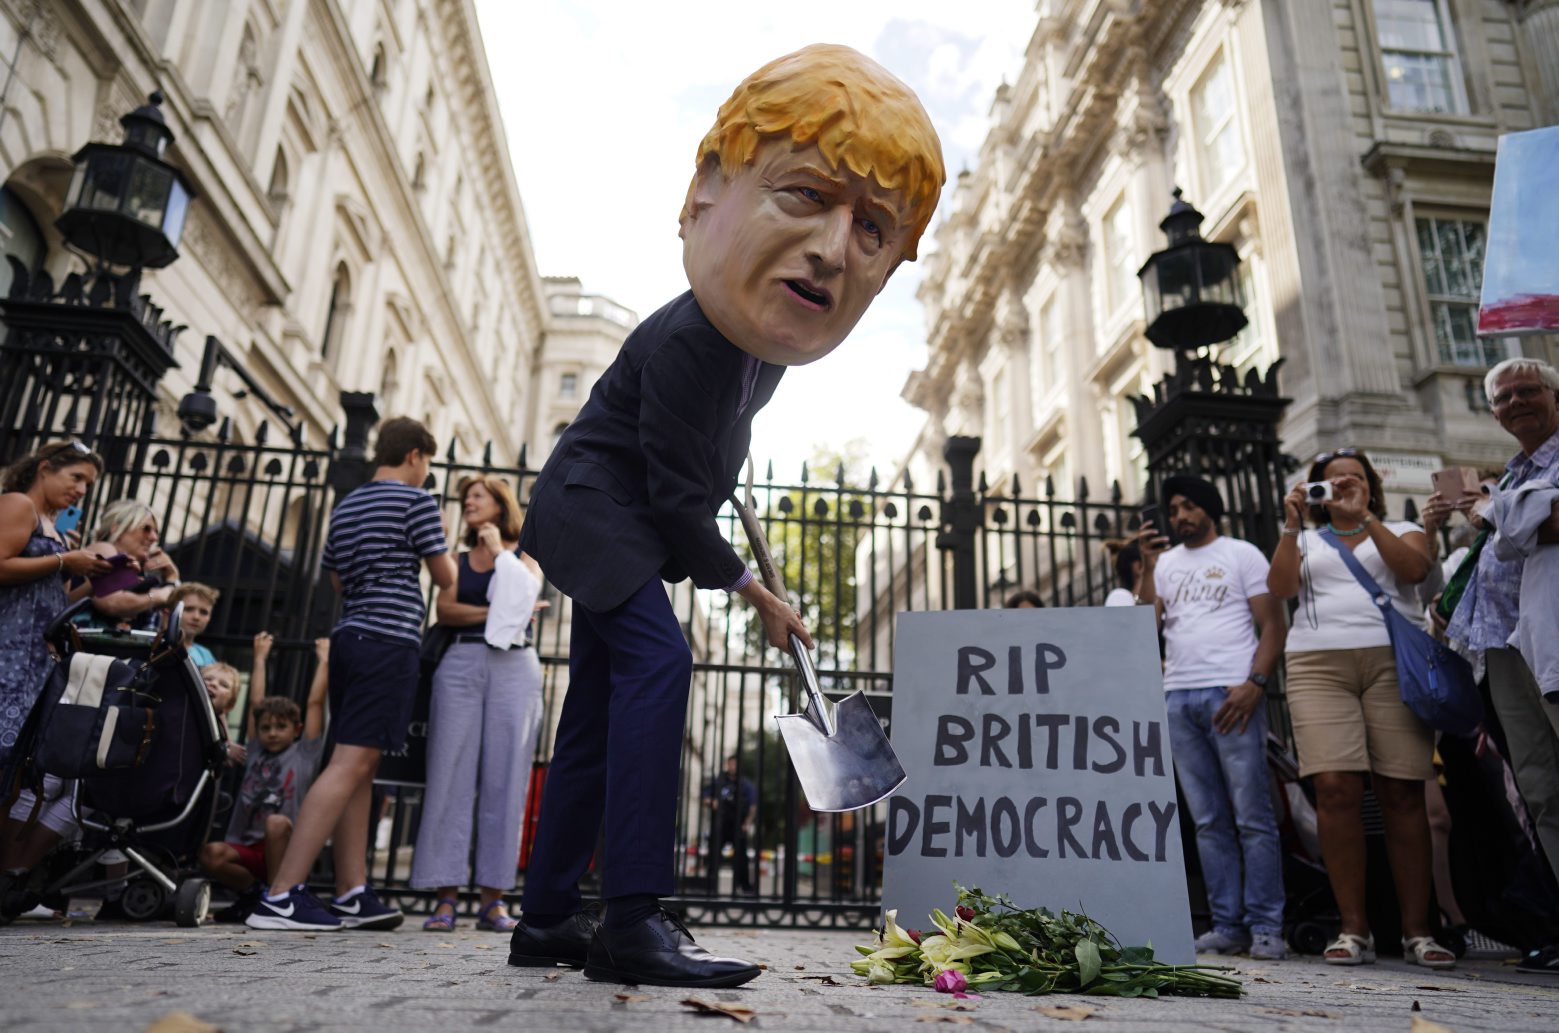 epa07799379 A protester depicting British Prime Minister Boris Johnson demonstrates during a protest outside the gates of Number 10 Downing Street in Westminster, London, Britain, 28 August 2019. The UK government is to suspend Parliament after the summer break, a move that might block MPs from voting against a possible no-deal Brexit. In a letter to legislators, British PM Boris Johnson said he had asked Queen Elizabeth II to suspend the current parliamentary session in the second week of September until 14 October.  EPA/WILL OLIVER BRITAIN POLITICS BREXIT